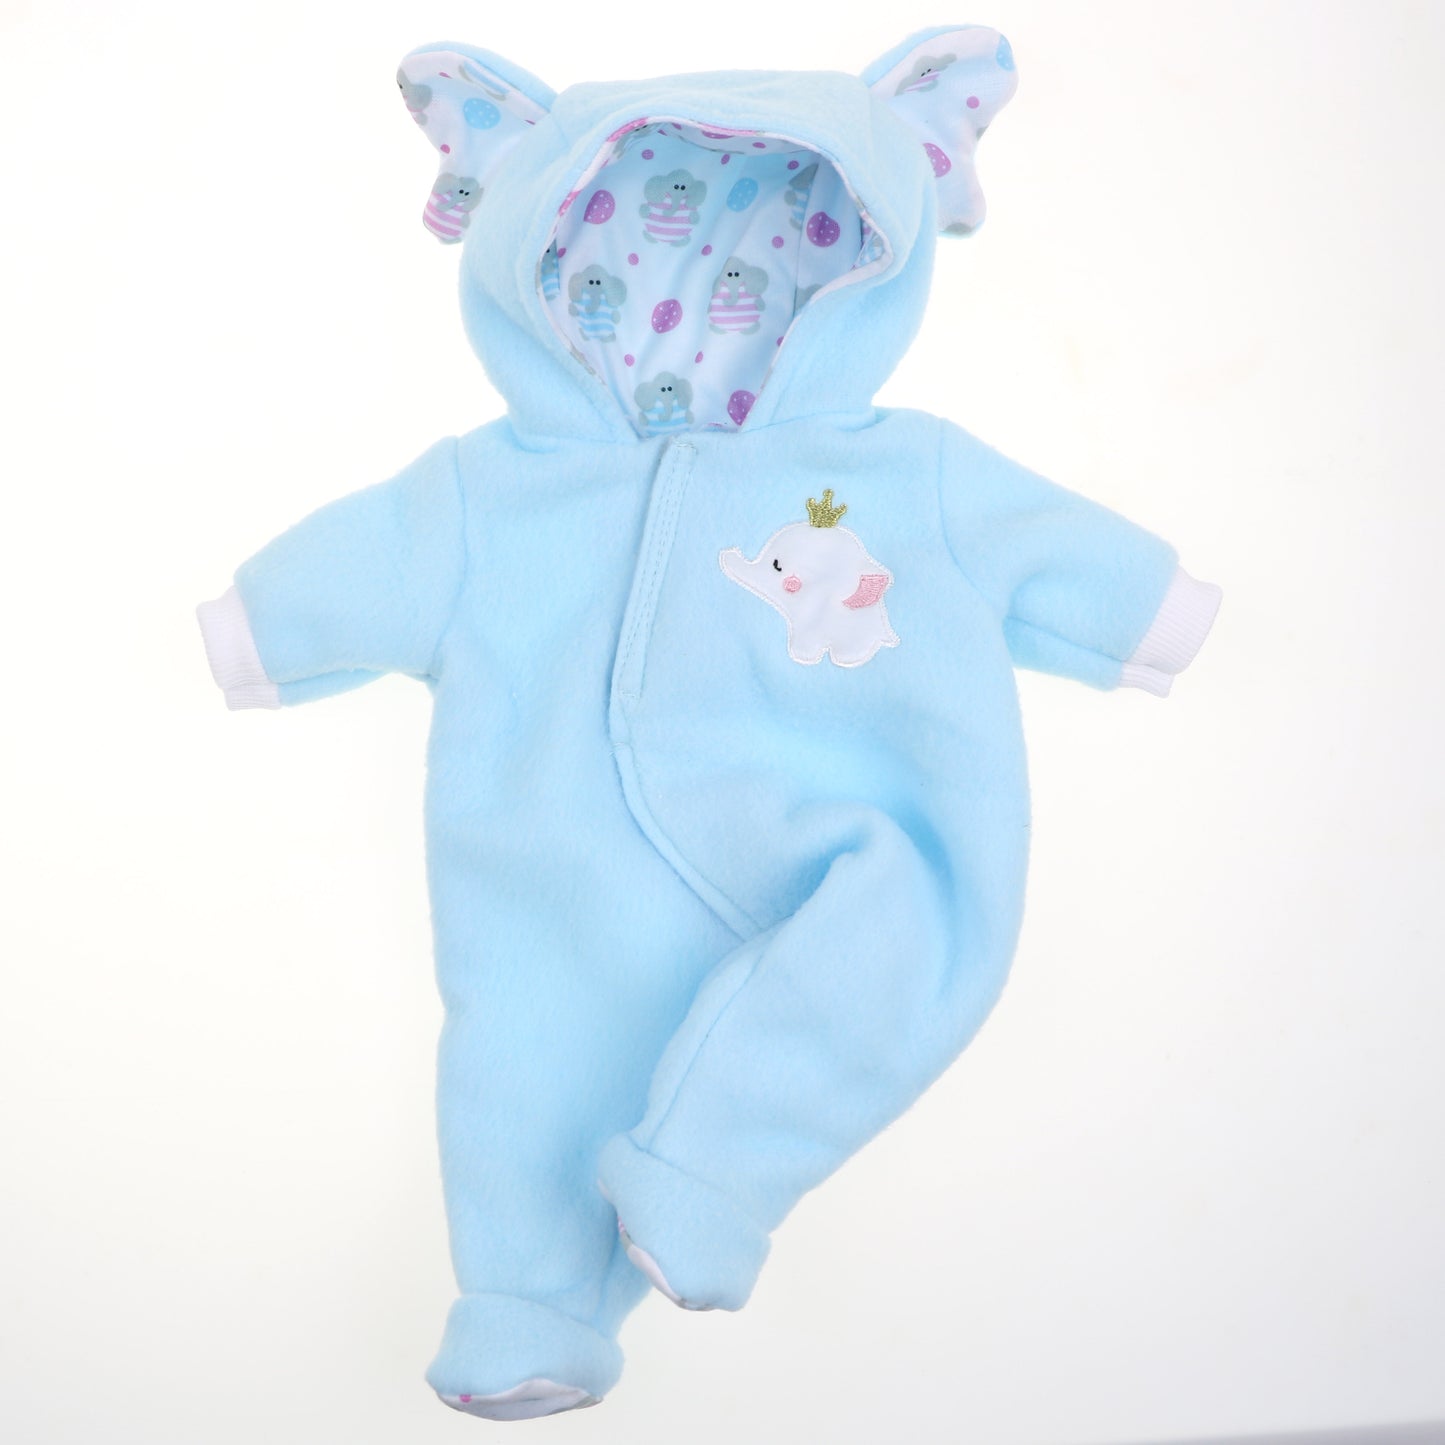 JC Toys Berenguer Boutique Baby Doll Outfit Blue Elephant Themed Hooded Onesie Fits dolls 14"- 18"